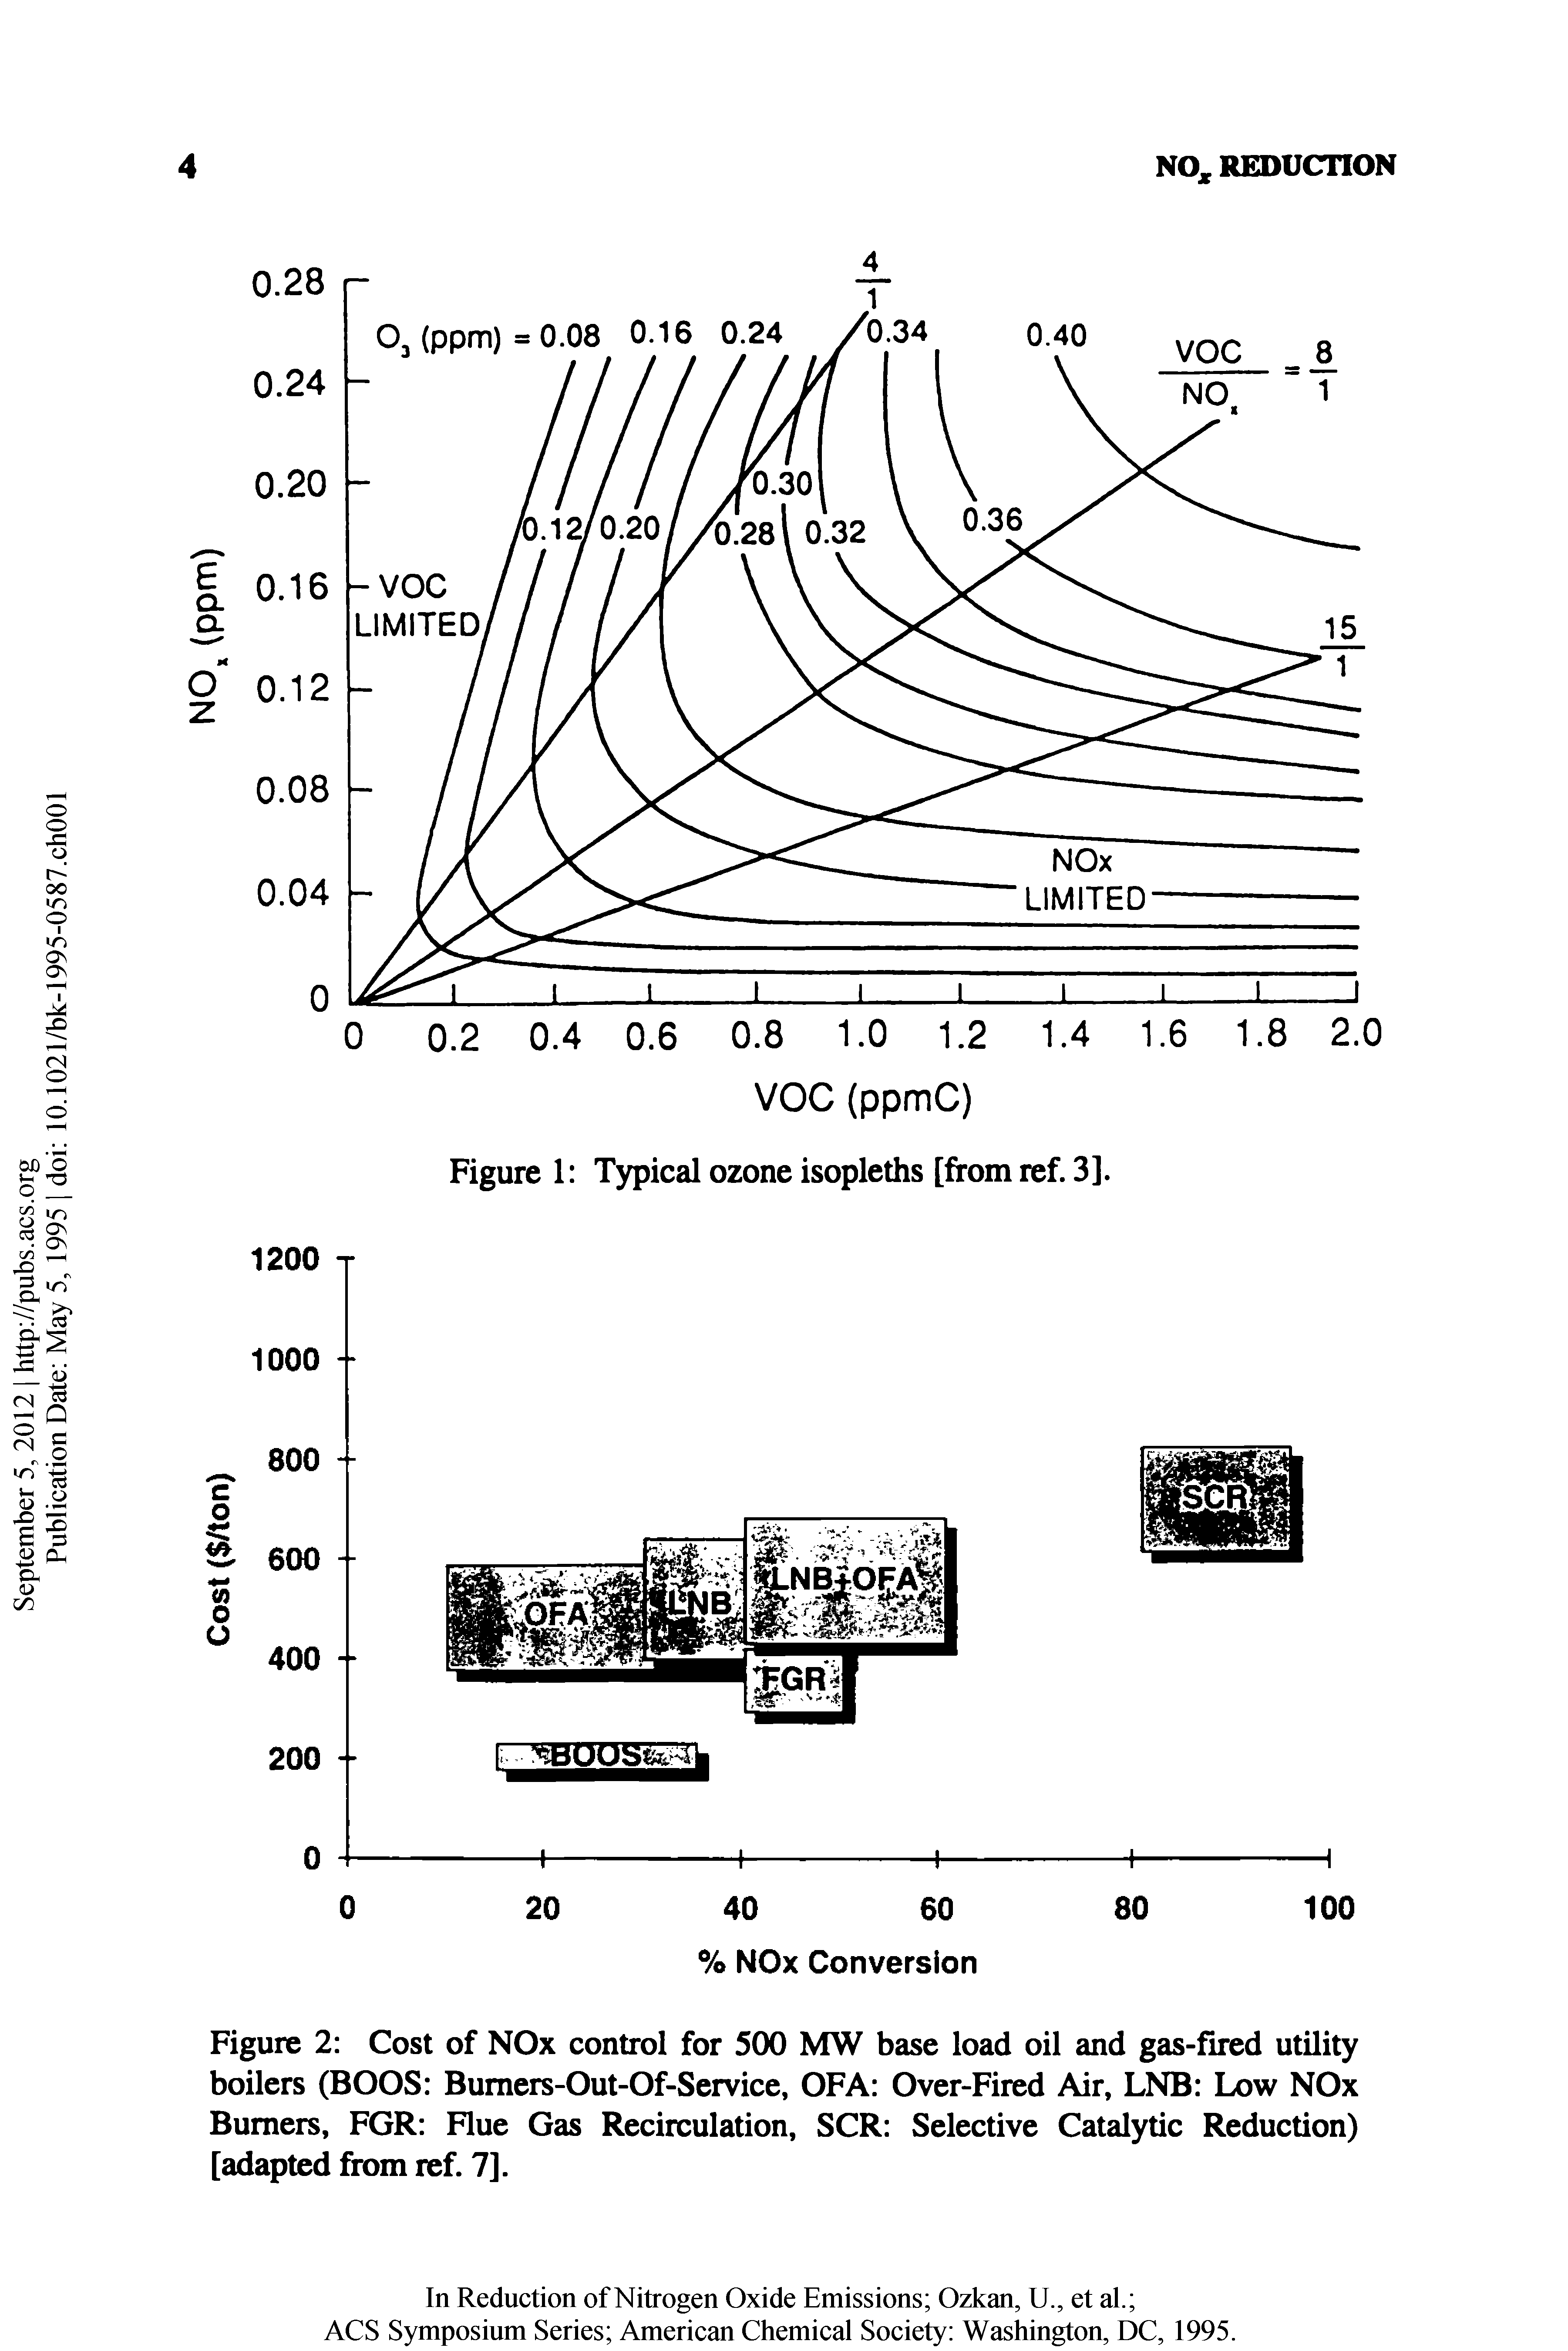 Figure 2 Cost of NOx control for 500 MW base load oil and gas-fired utility boilers (BOOS Bumers-Out-Of-Service, OFA Over-Fired Air, LNB Low NOx Burners, FOR Flue Gas Recirculation, SCR Selective Catalytic Reduction) [adapted from ref. 7].